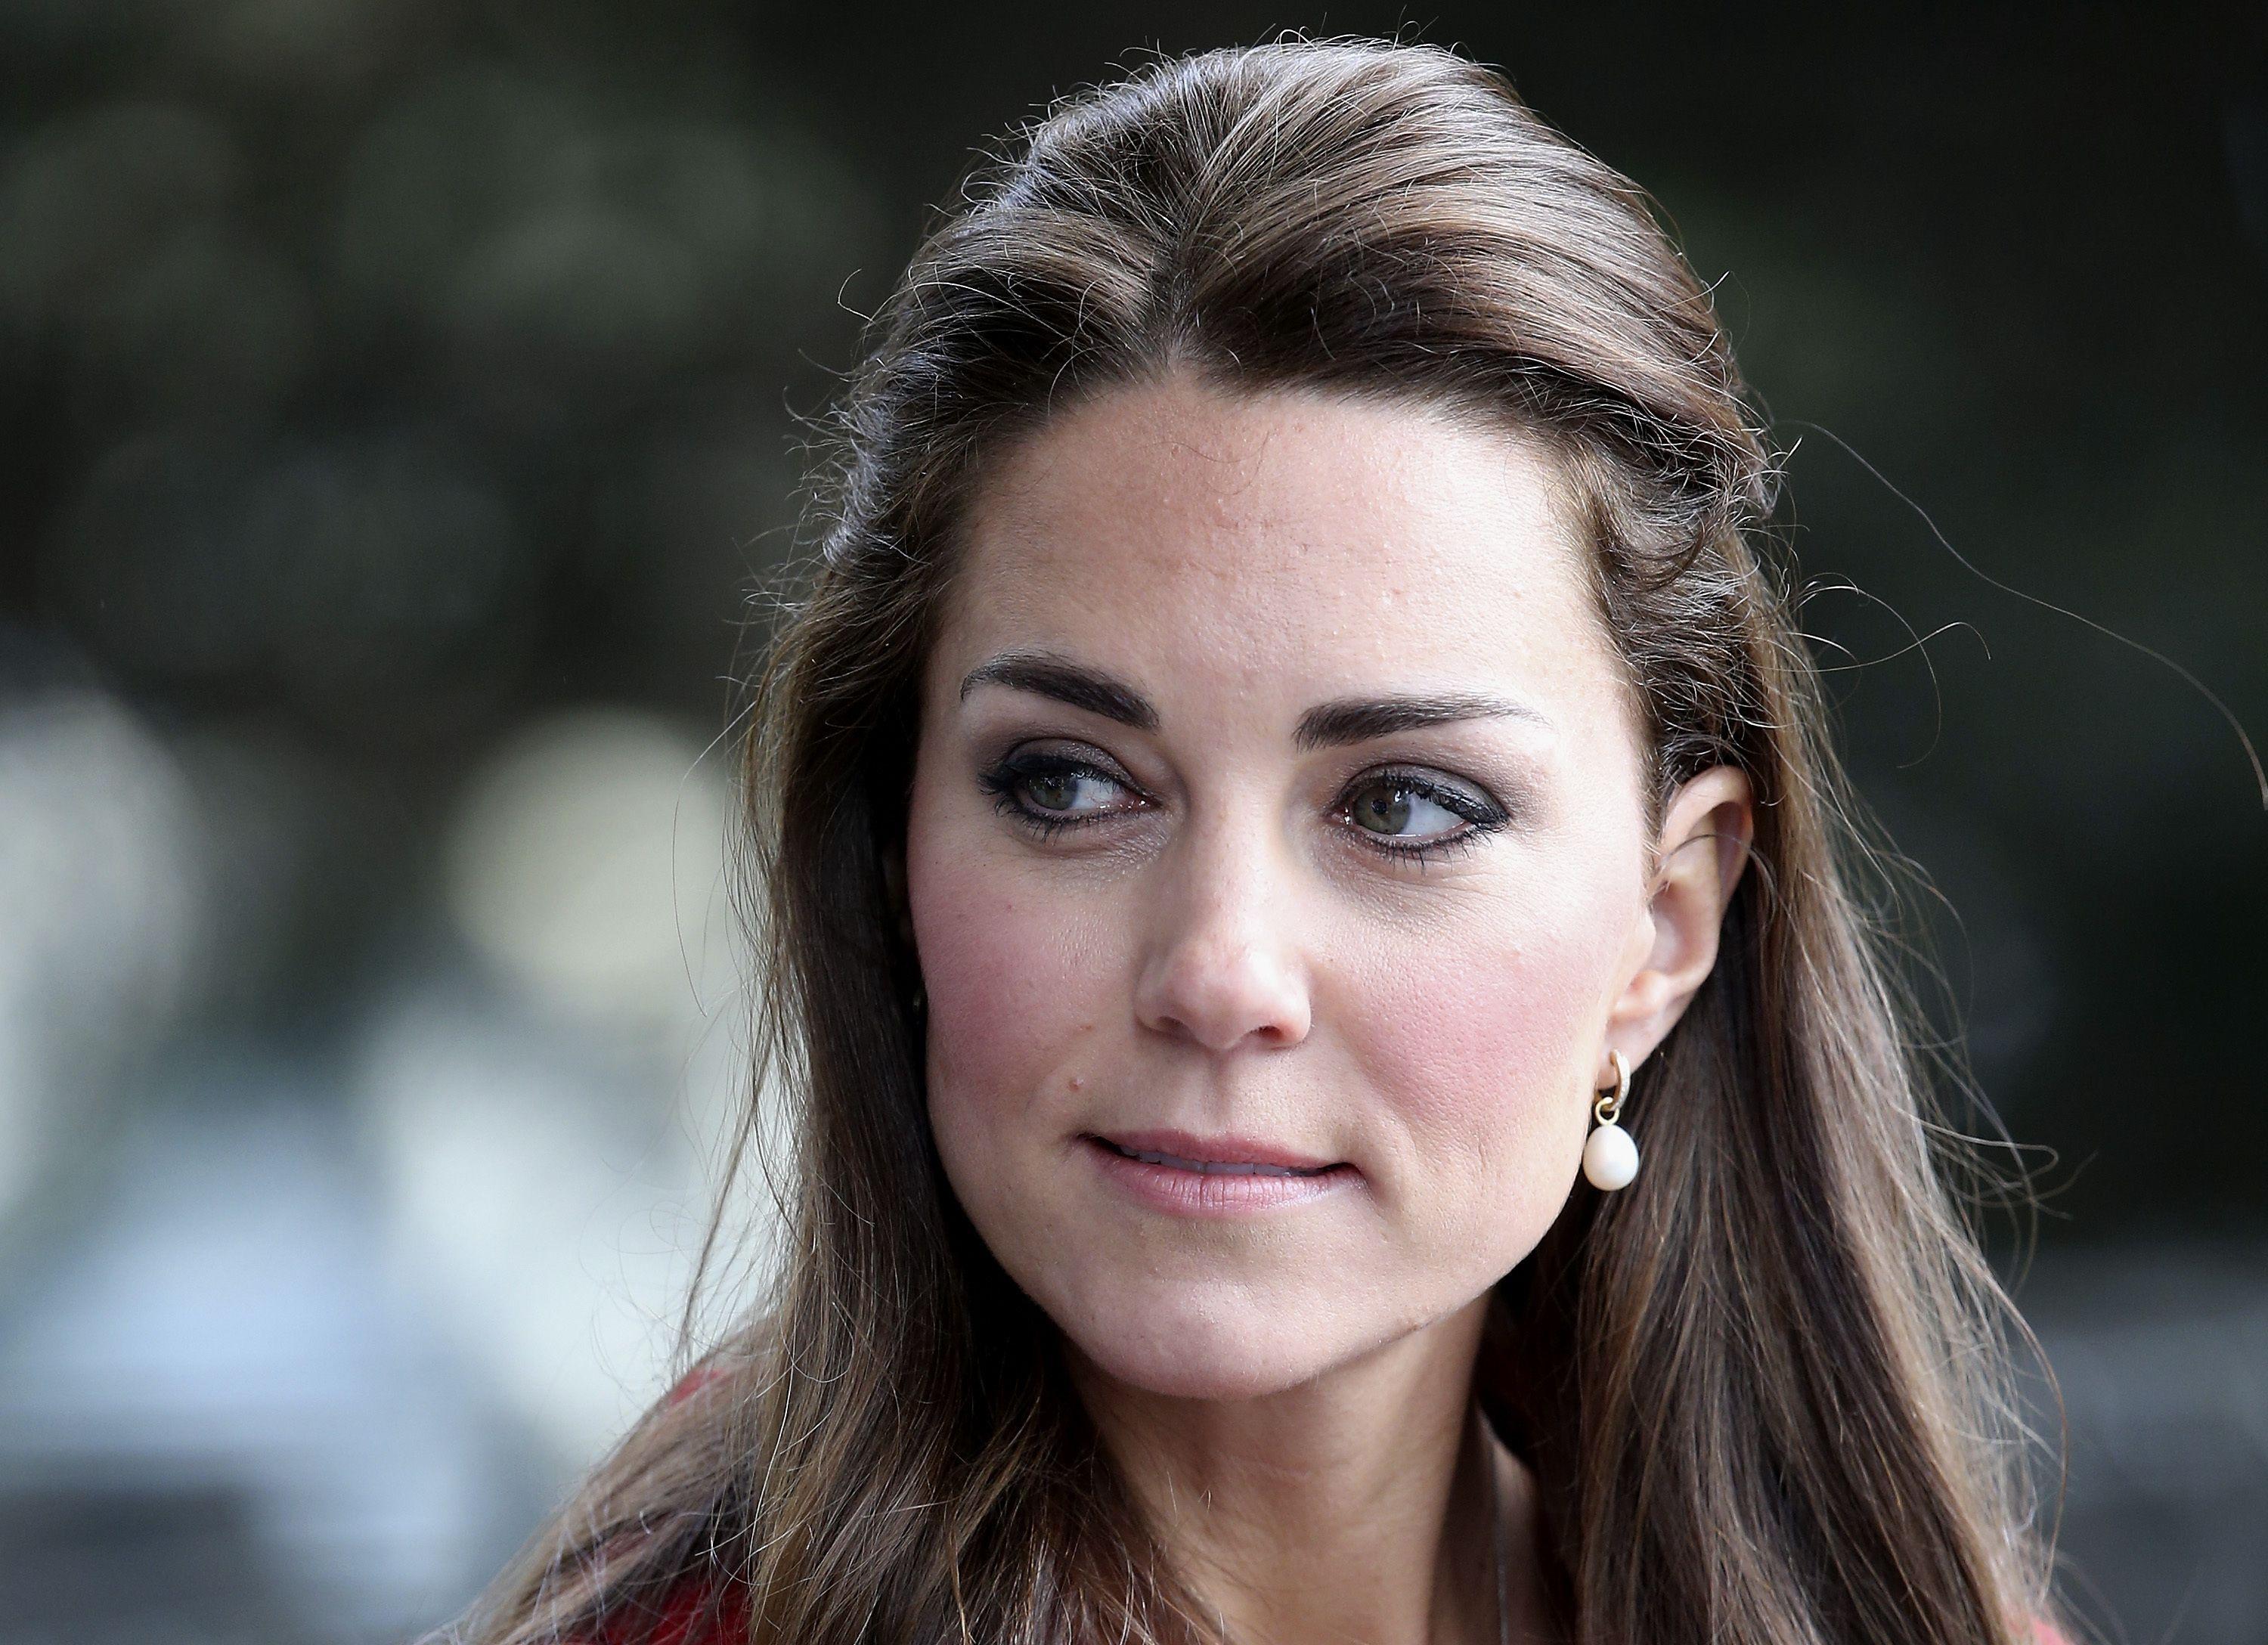 Kate Middleton Wallpaper Image Photo Picture Background